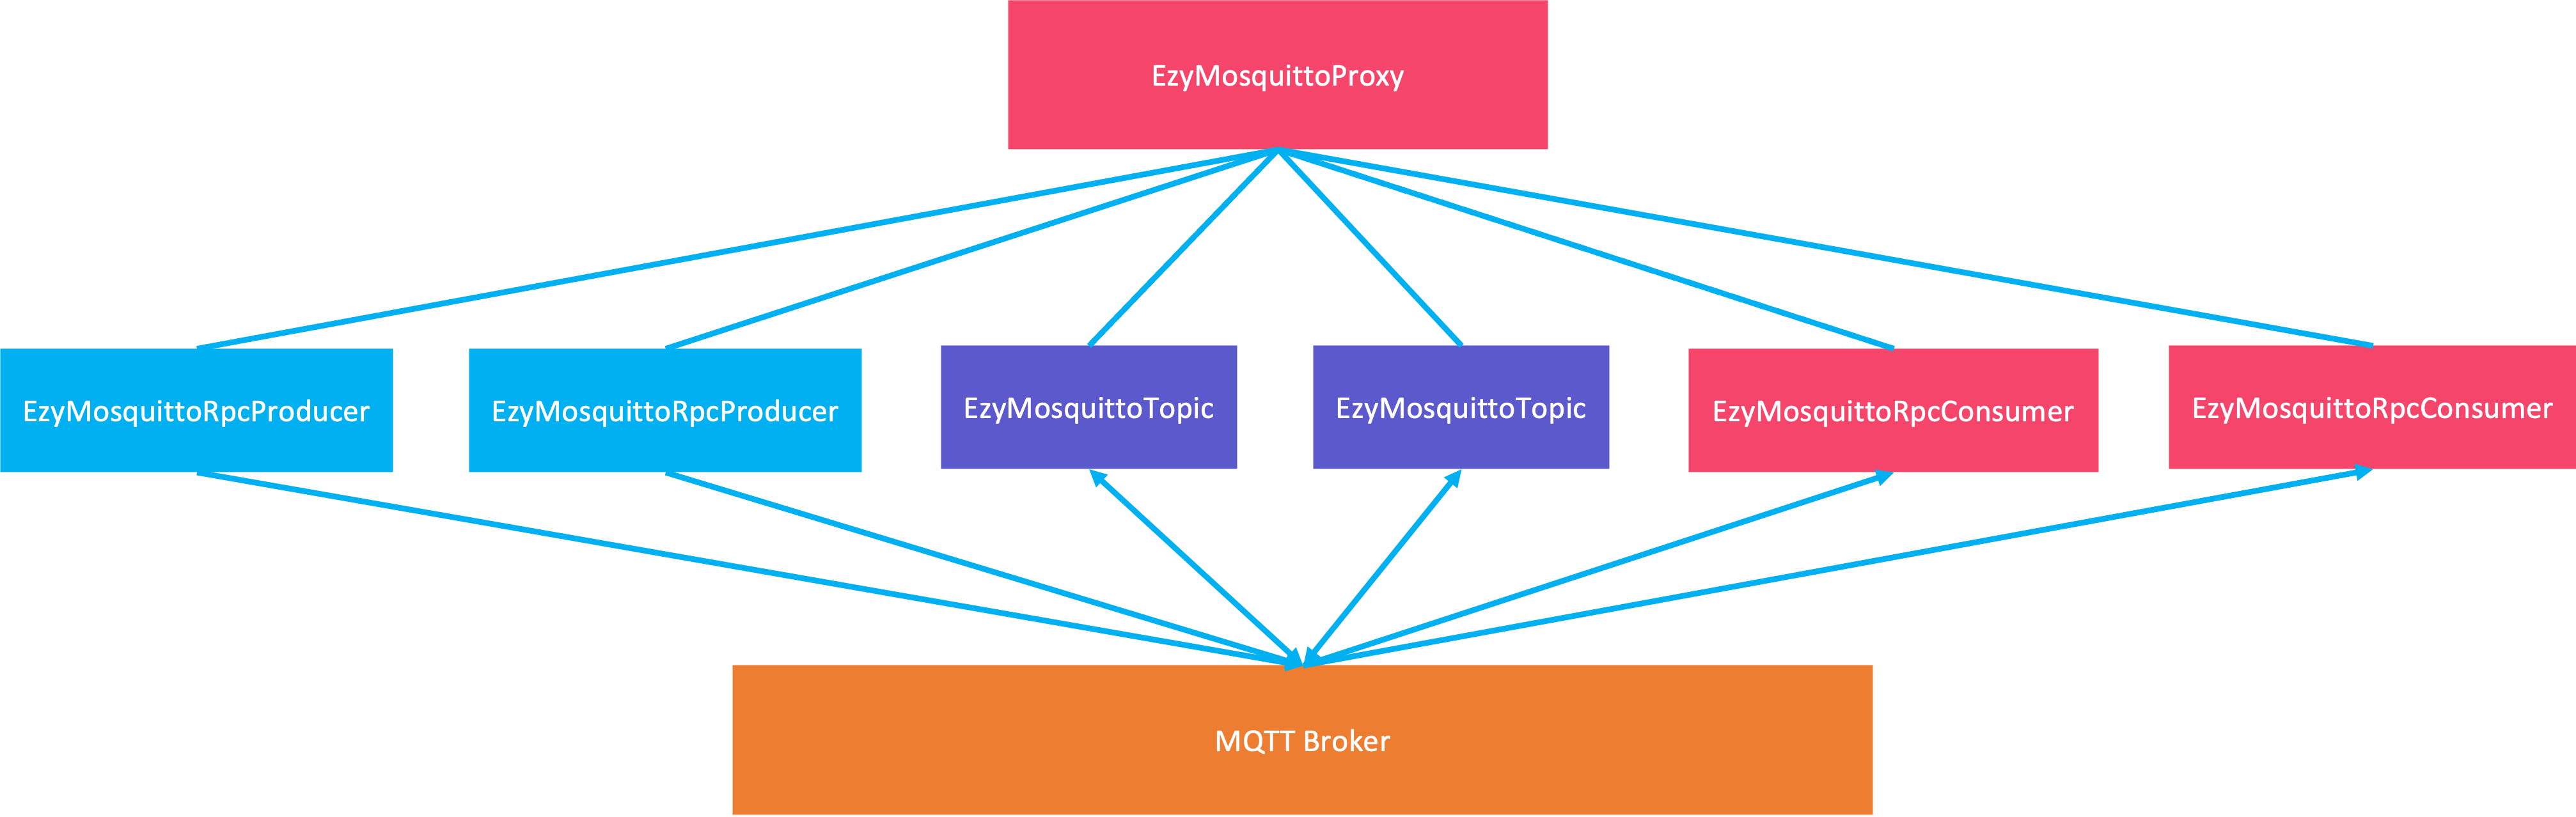 ezymq-mosquitto-structure.png